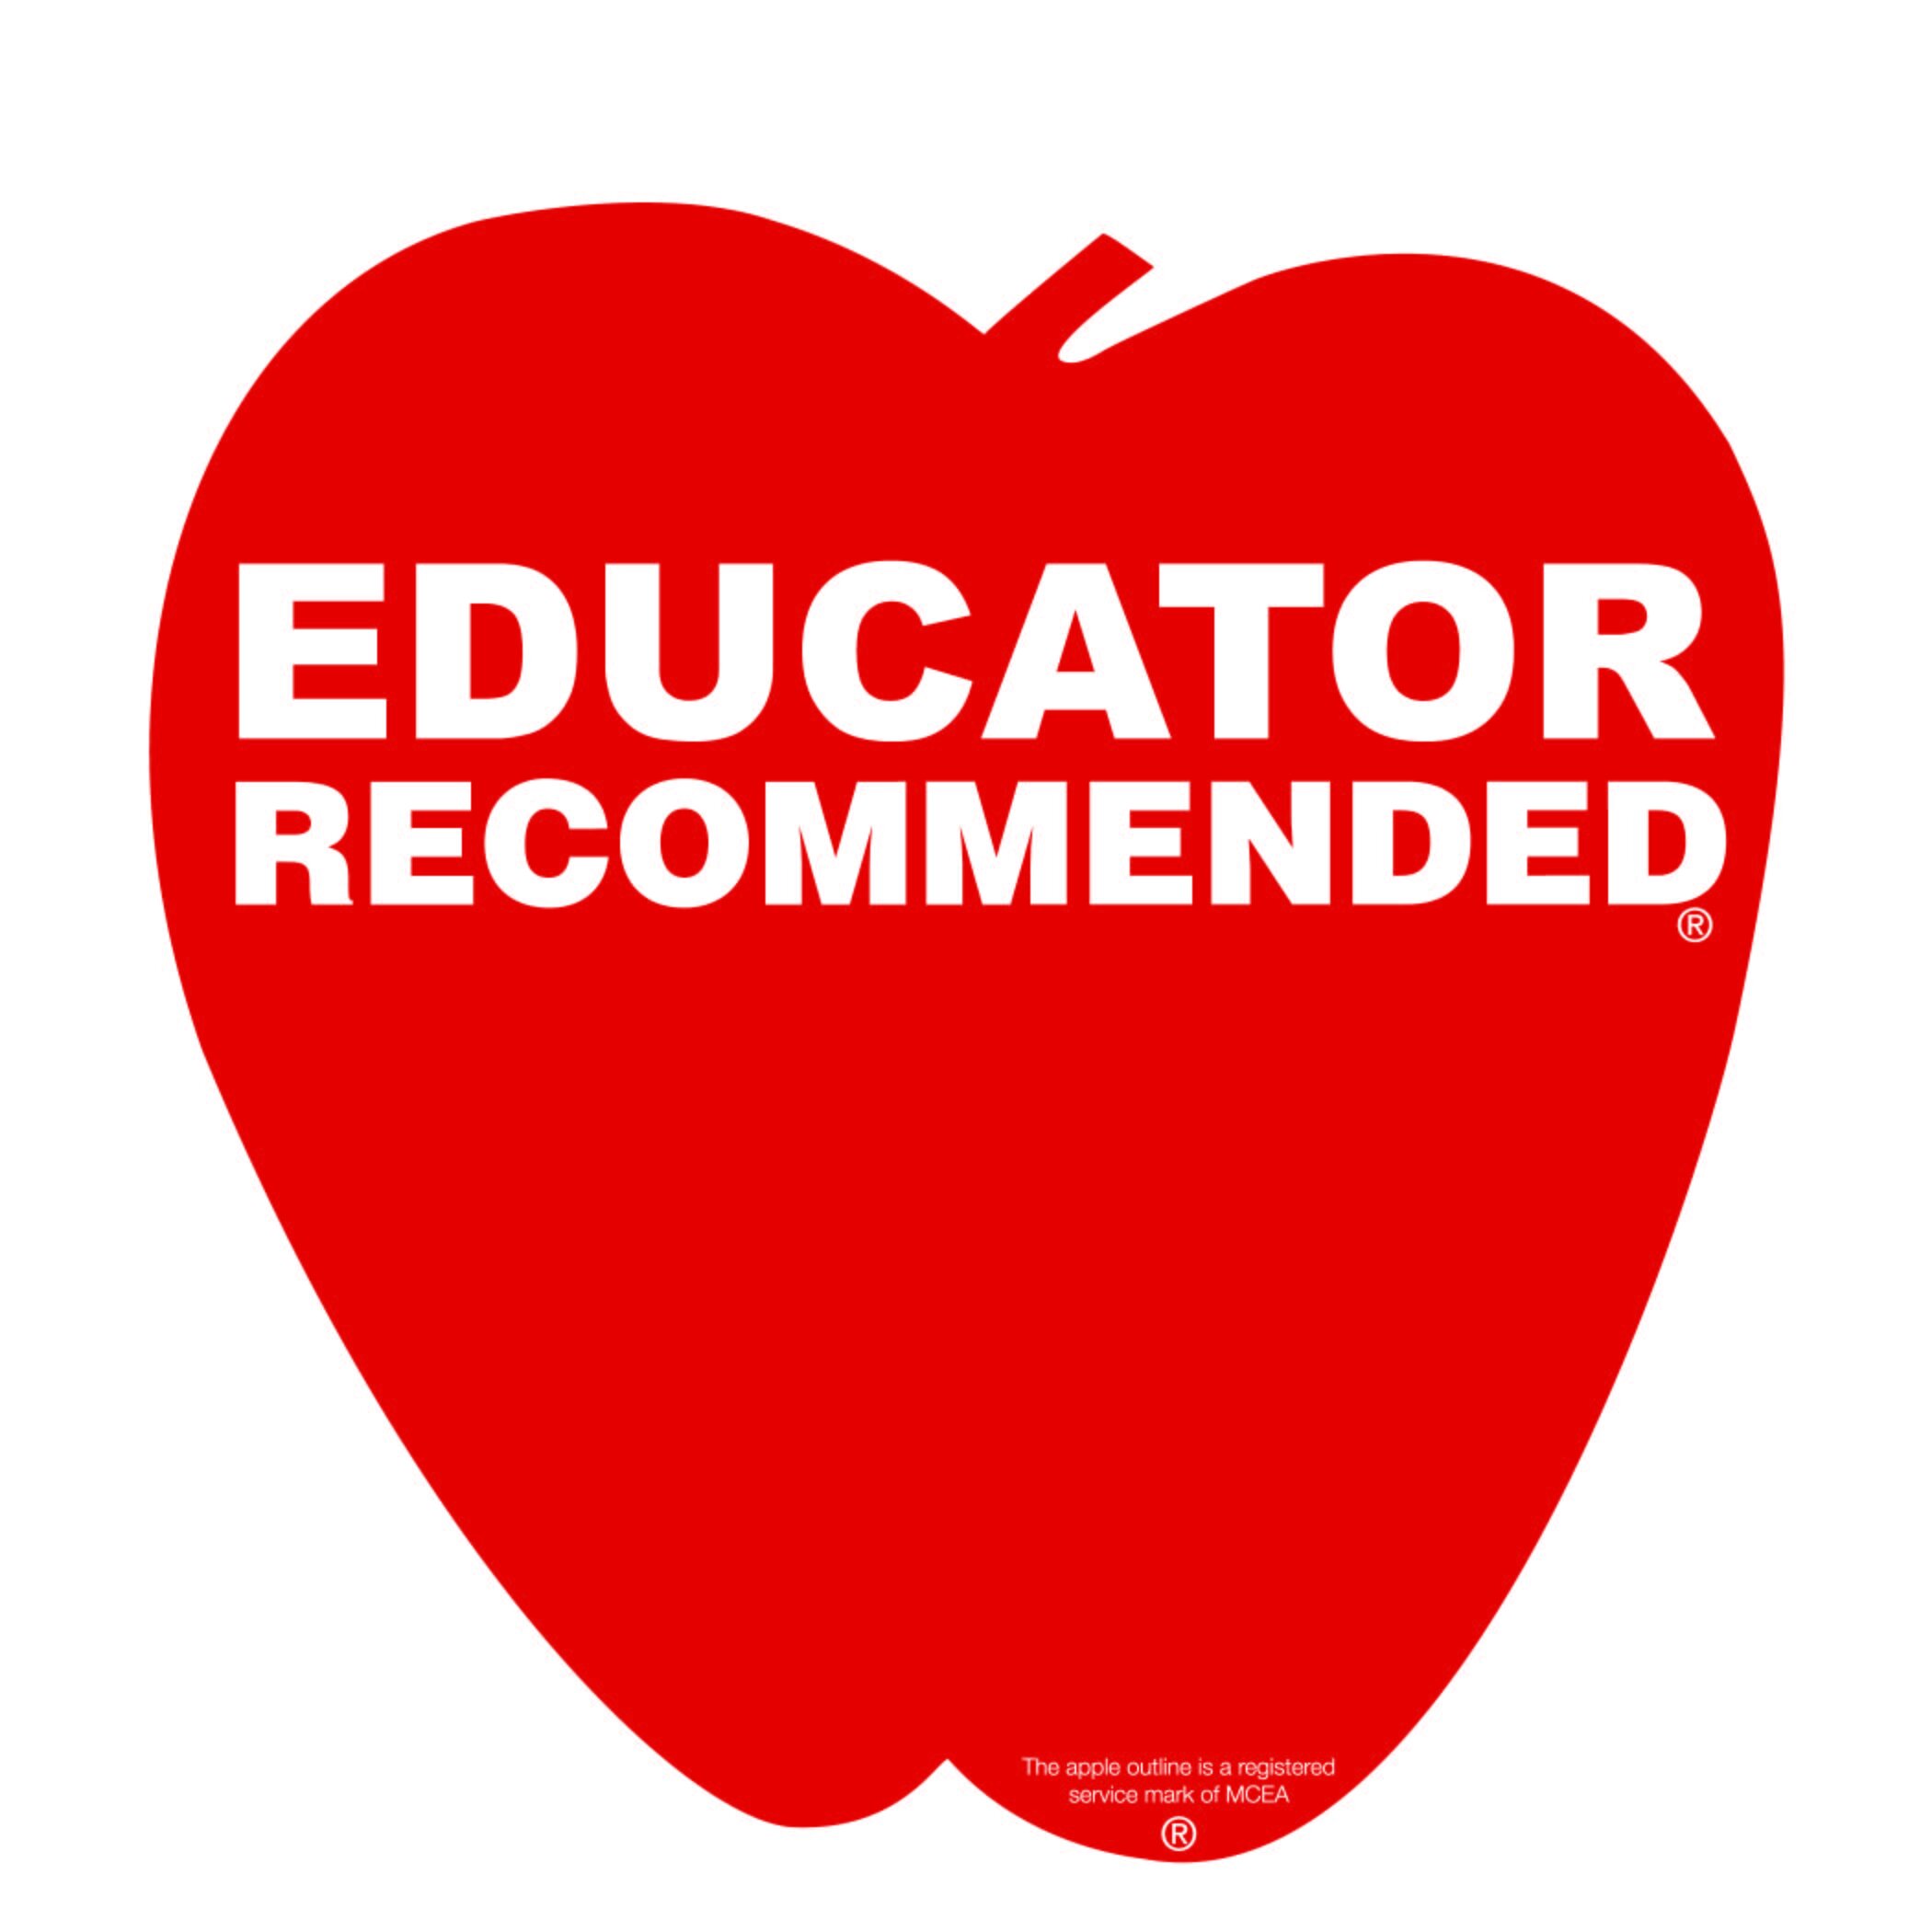 Delegate Heather Bagnall is Educator Recommended!